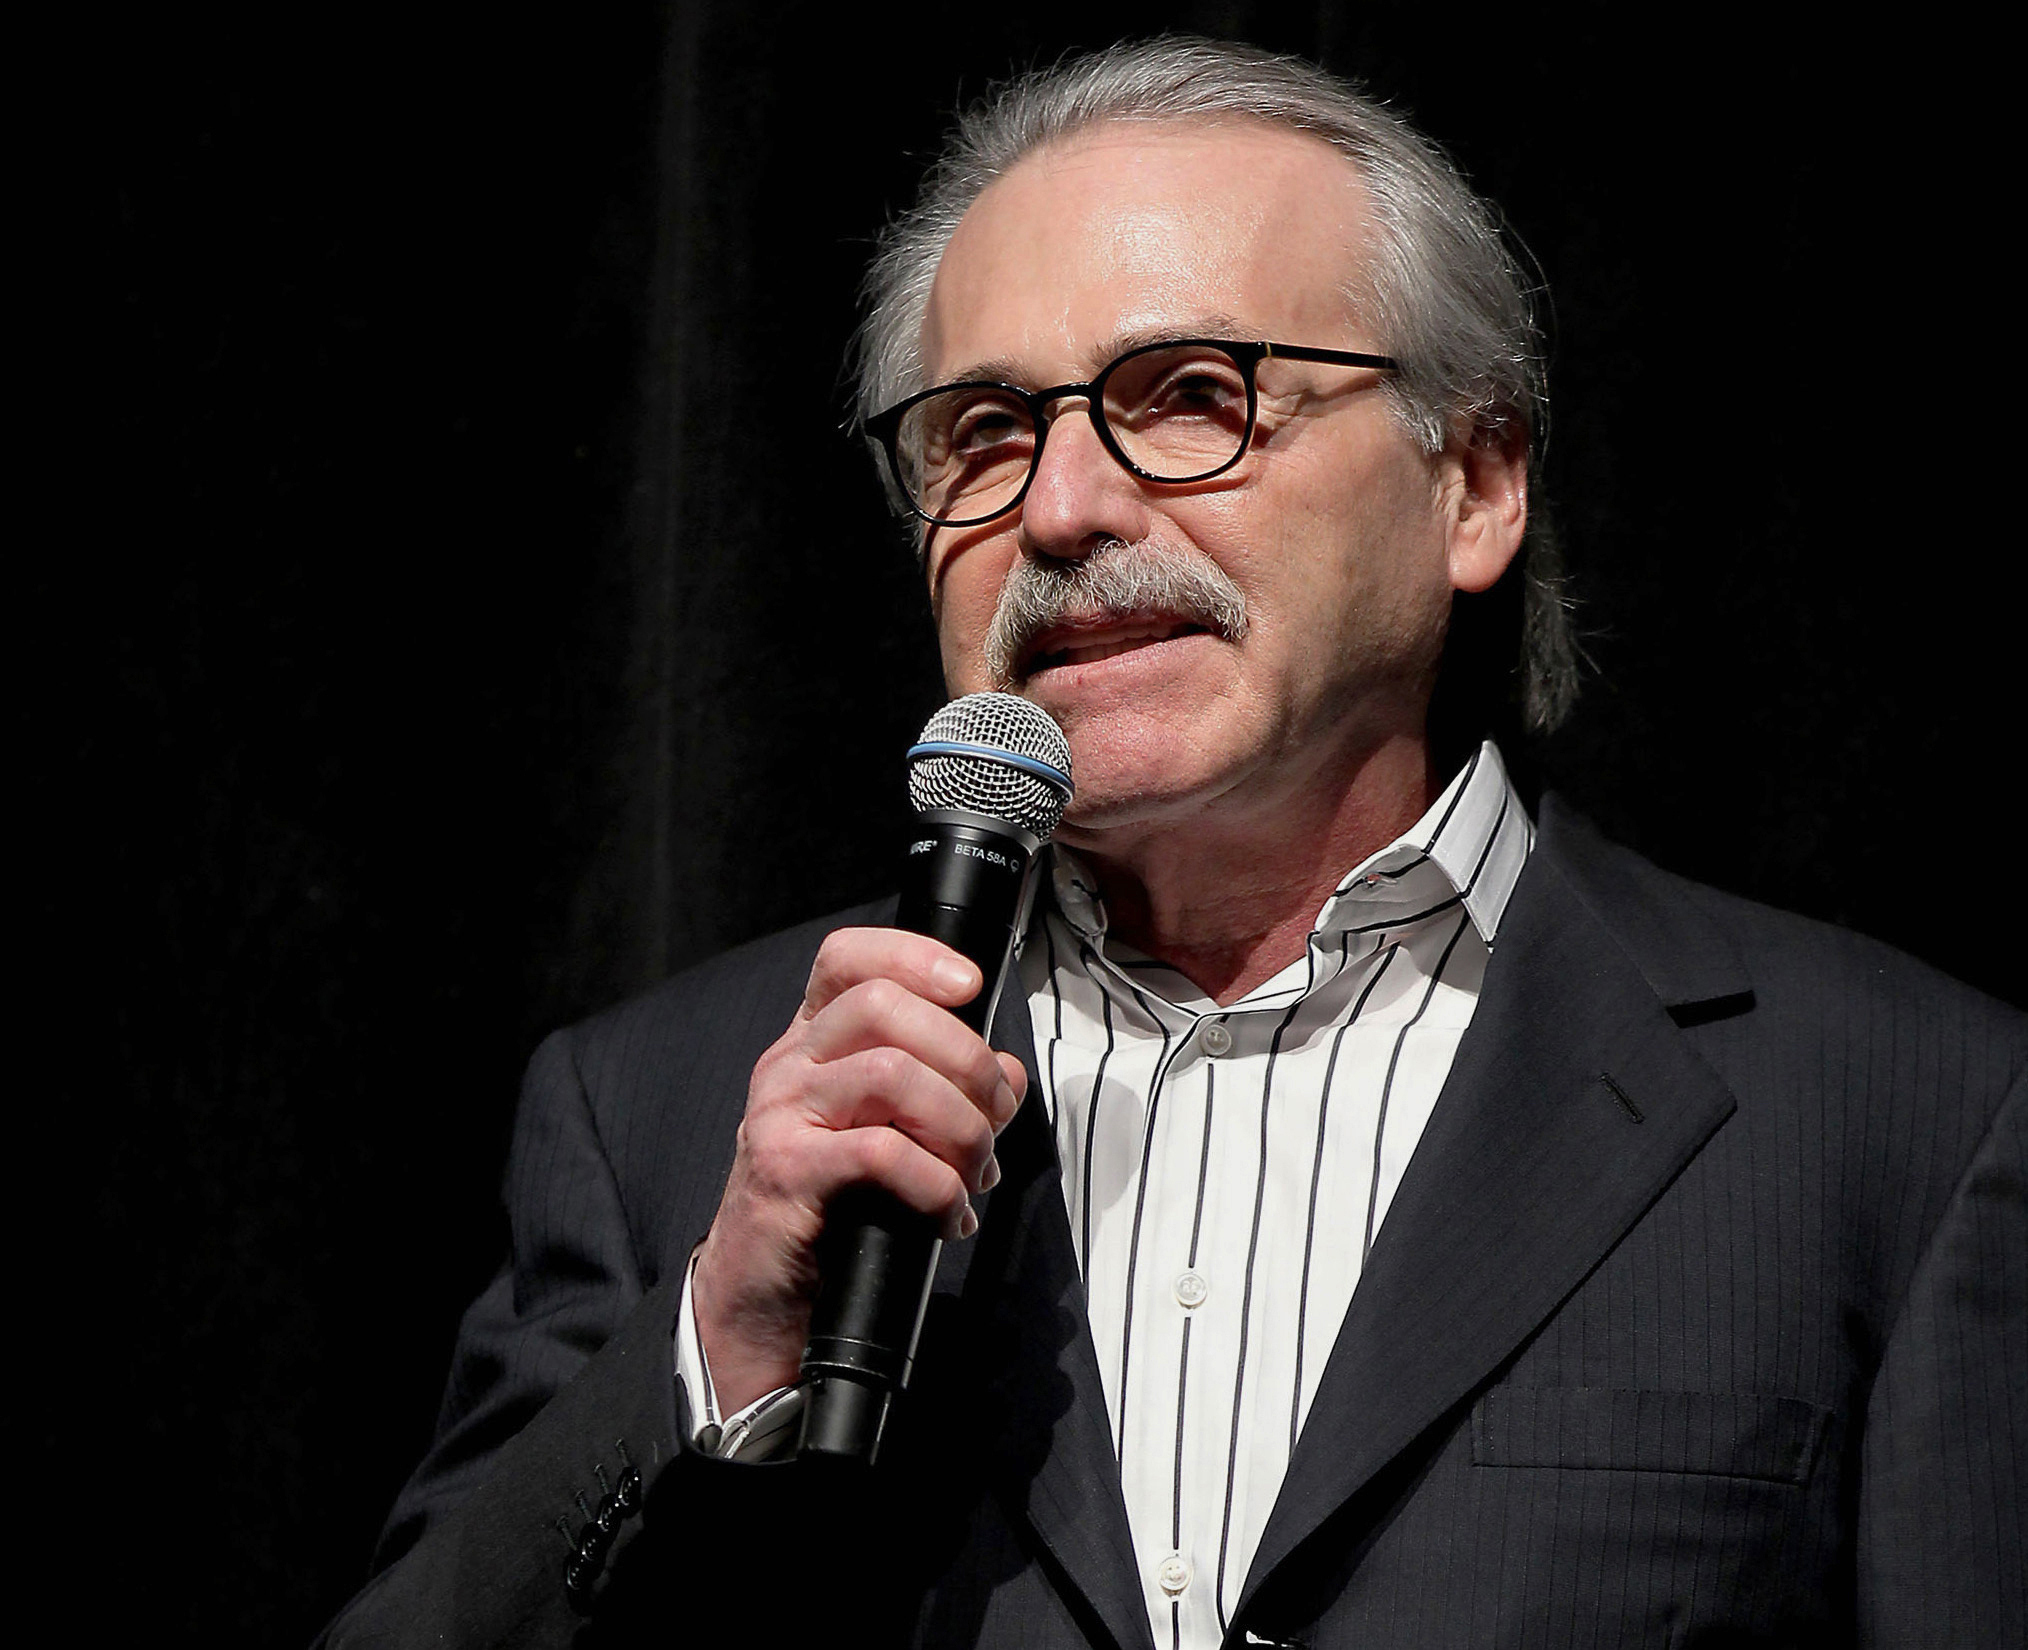 PHOTO: In this Jan. 31, 2014 photo David Pecker speaks at the Shape & Men's Fitness Super Bowl Party in New York.